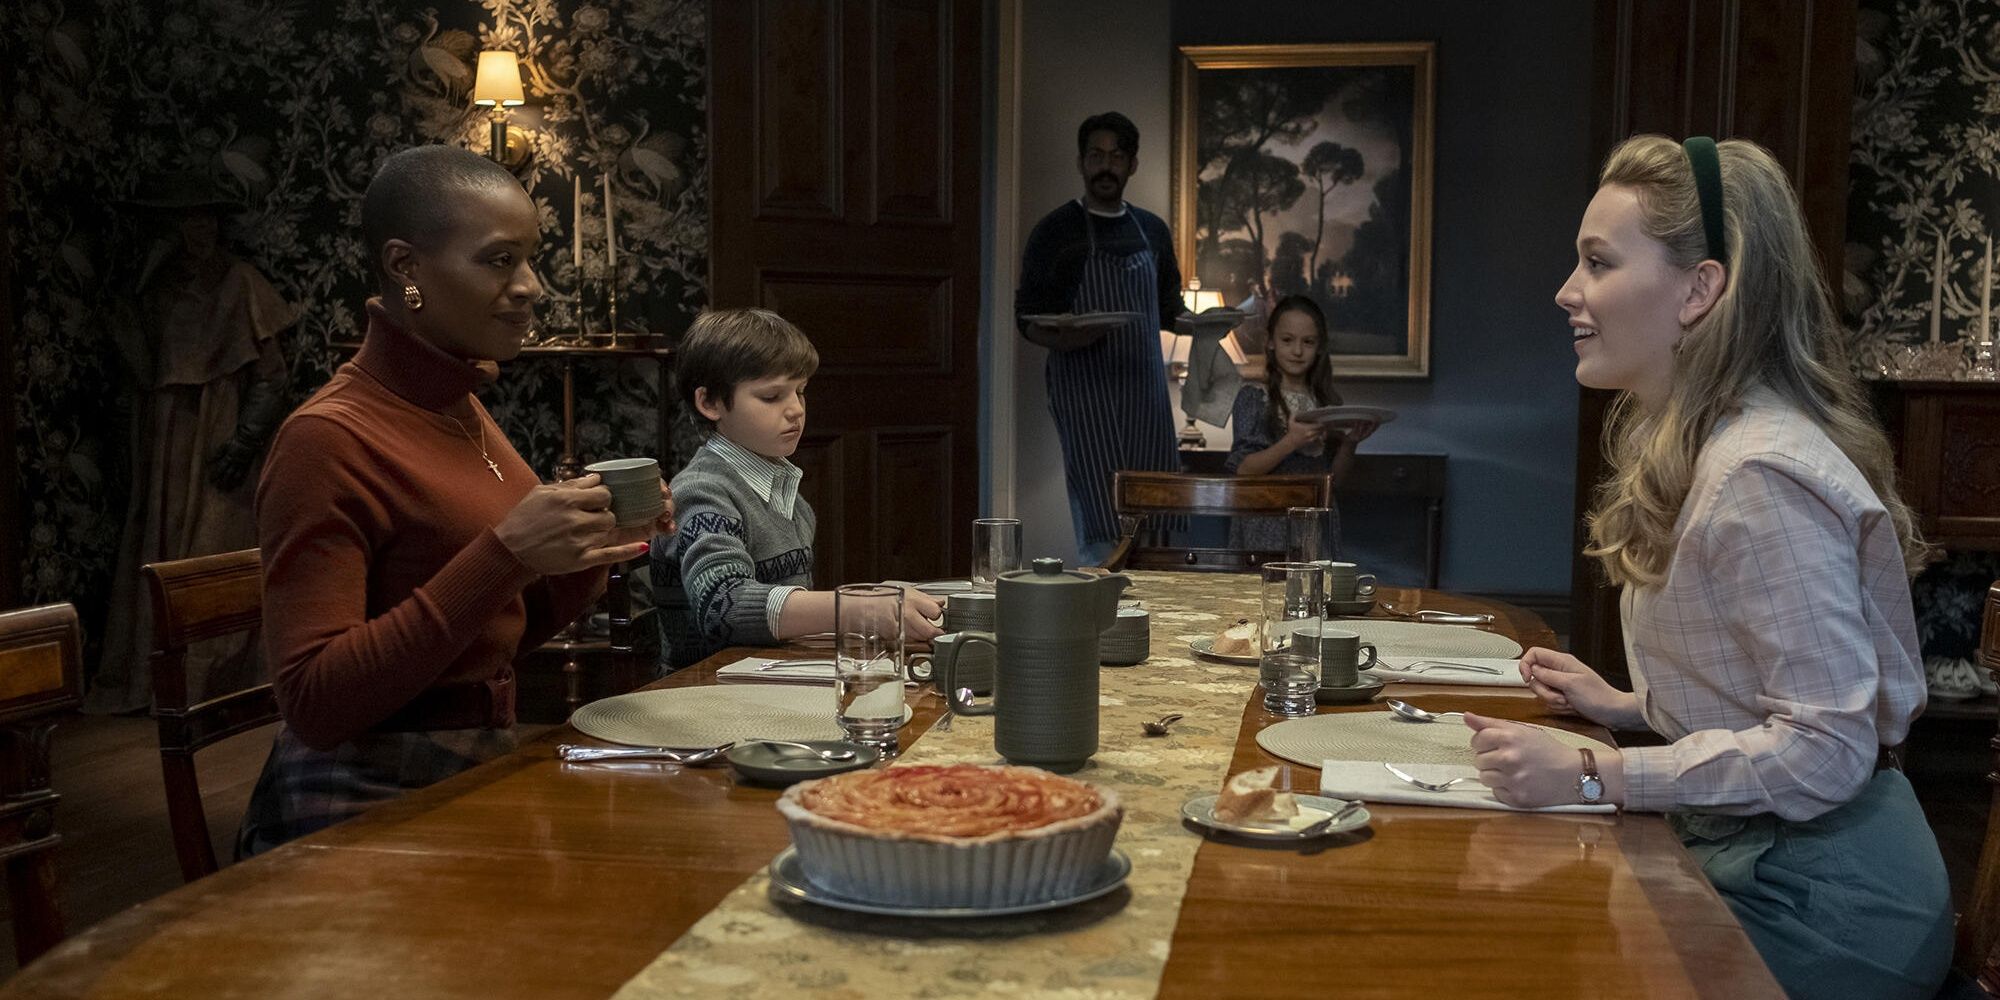 The Haunting Of Bly Manor 5 Reasons Why It’s Better Than The Haunting Of Hill House (& 5 Why Hill House Is Better)